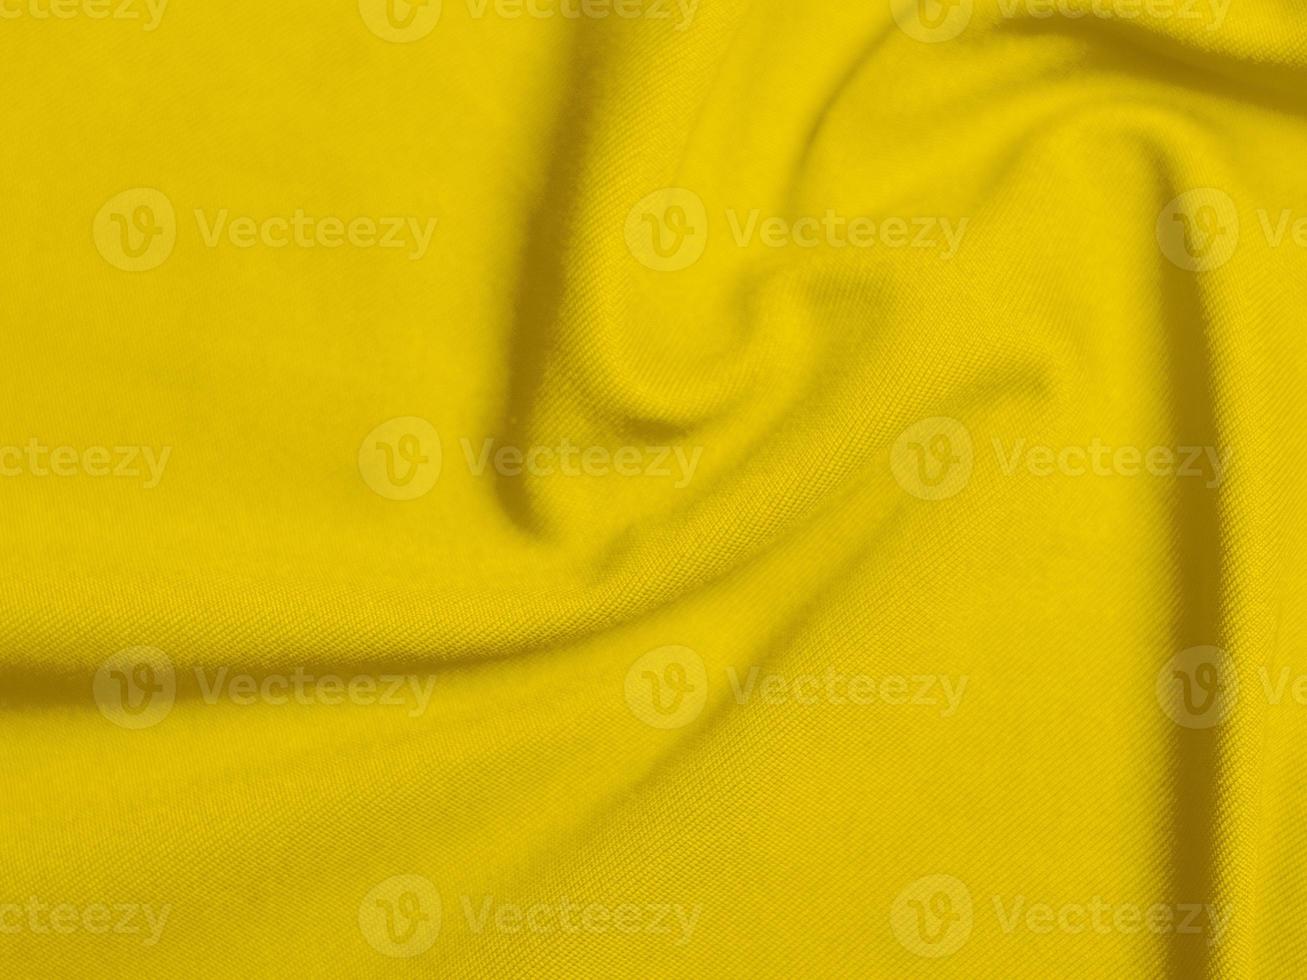 yellow velvet fabric texture used as background. Empty yellow  fabric background of soft and smooth textile material. There is space for text photo